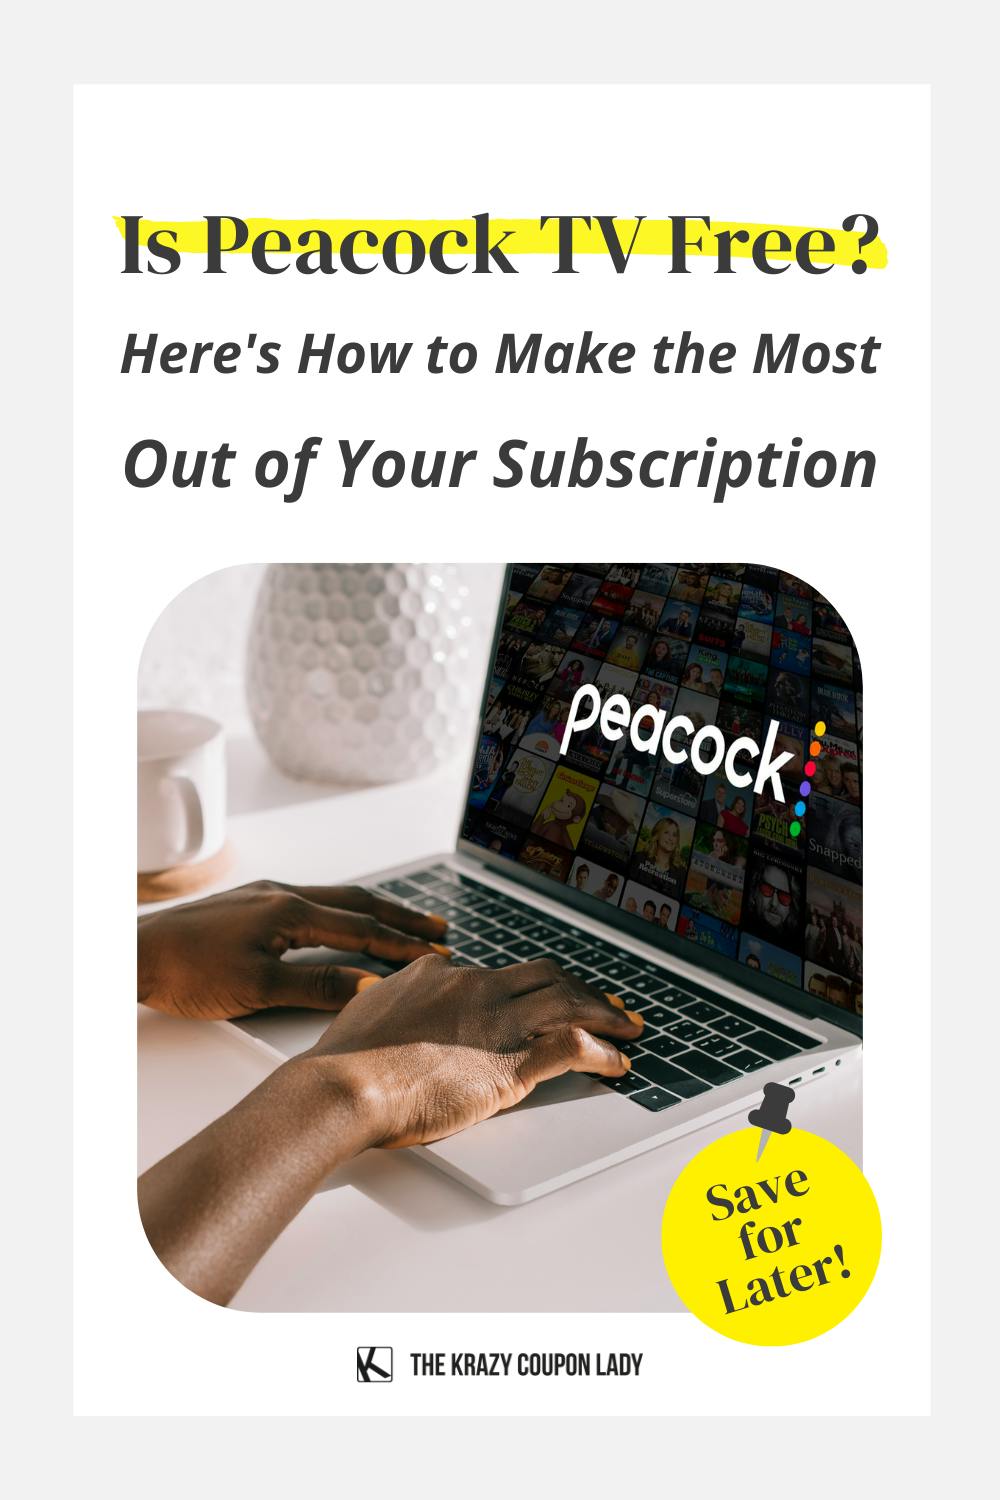 Is Peacock Free? Making the Most Out of Your Subscription